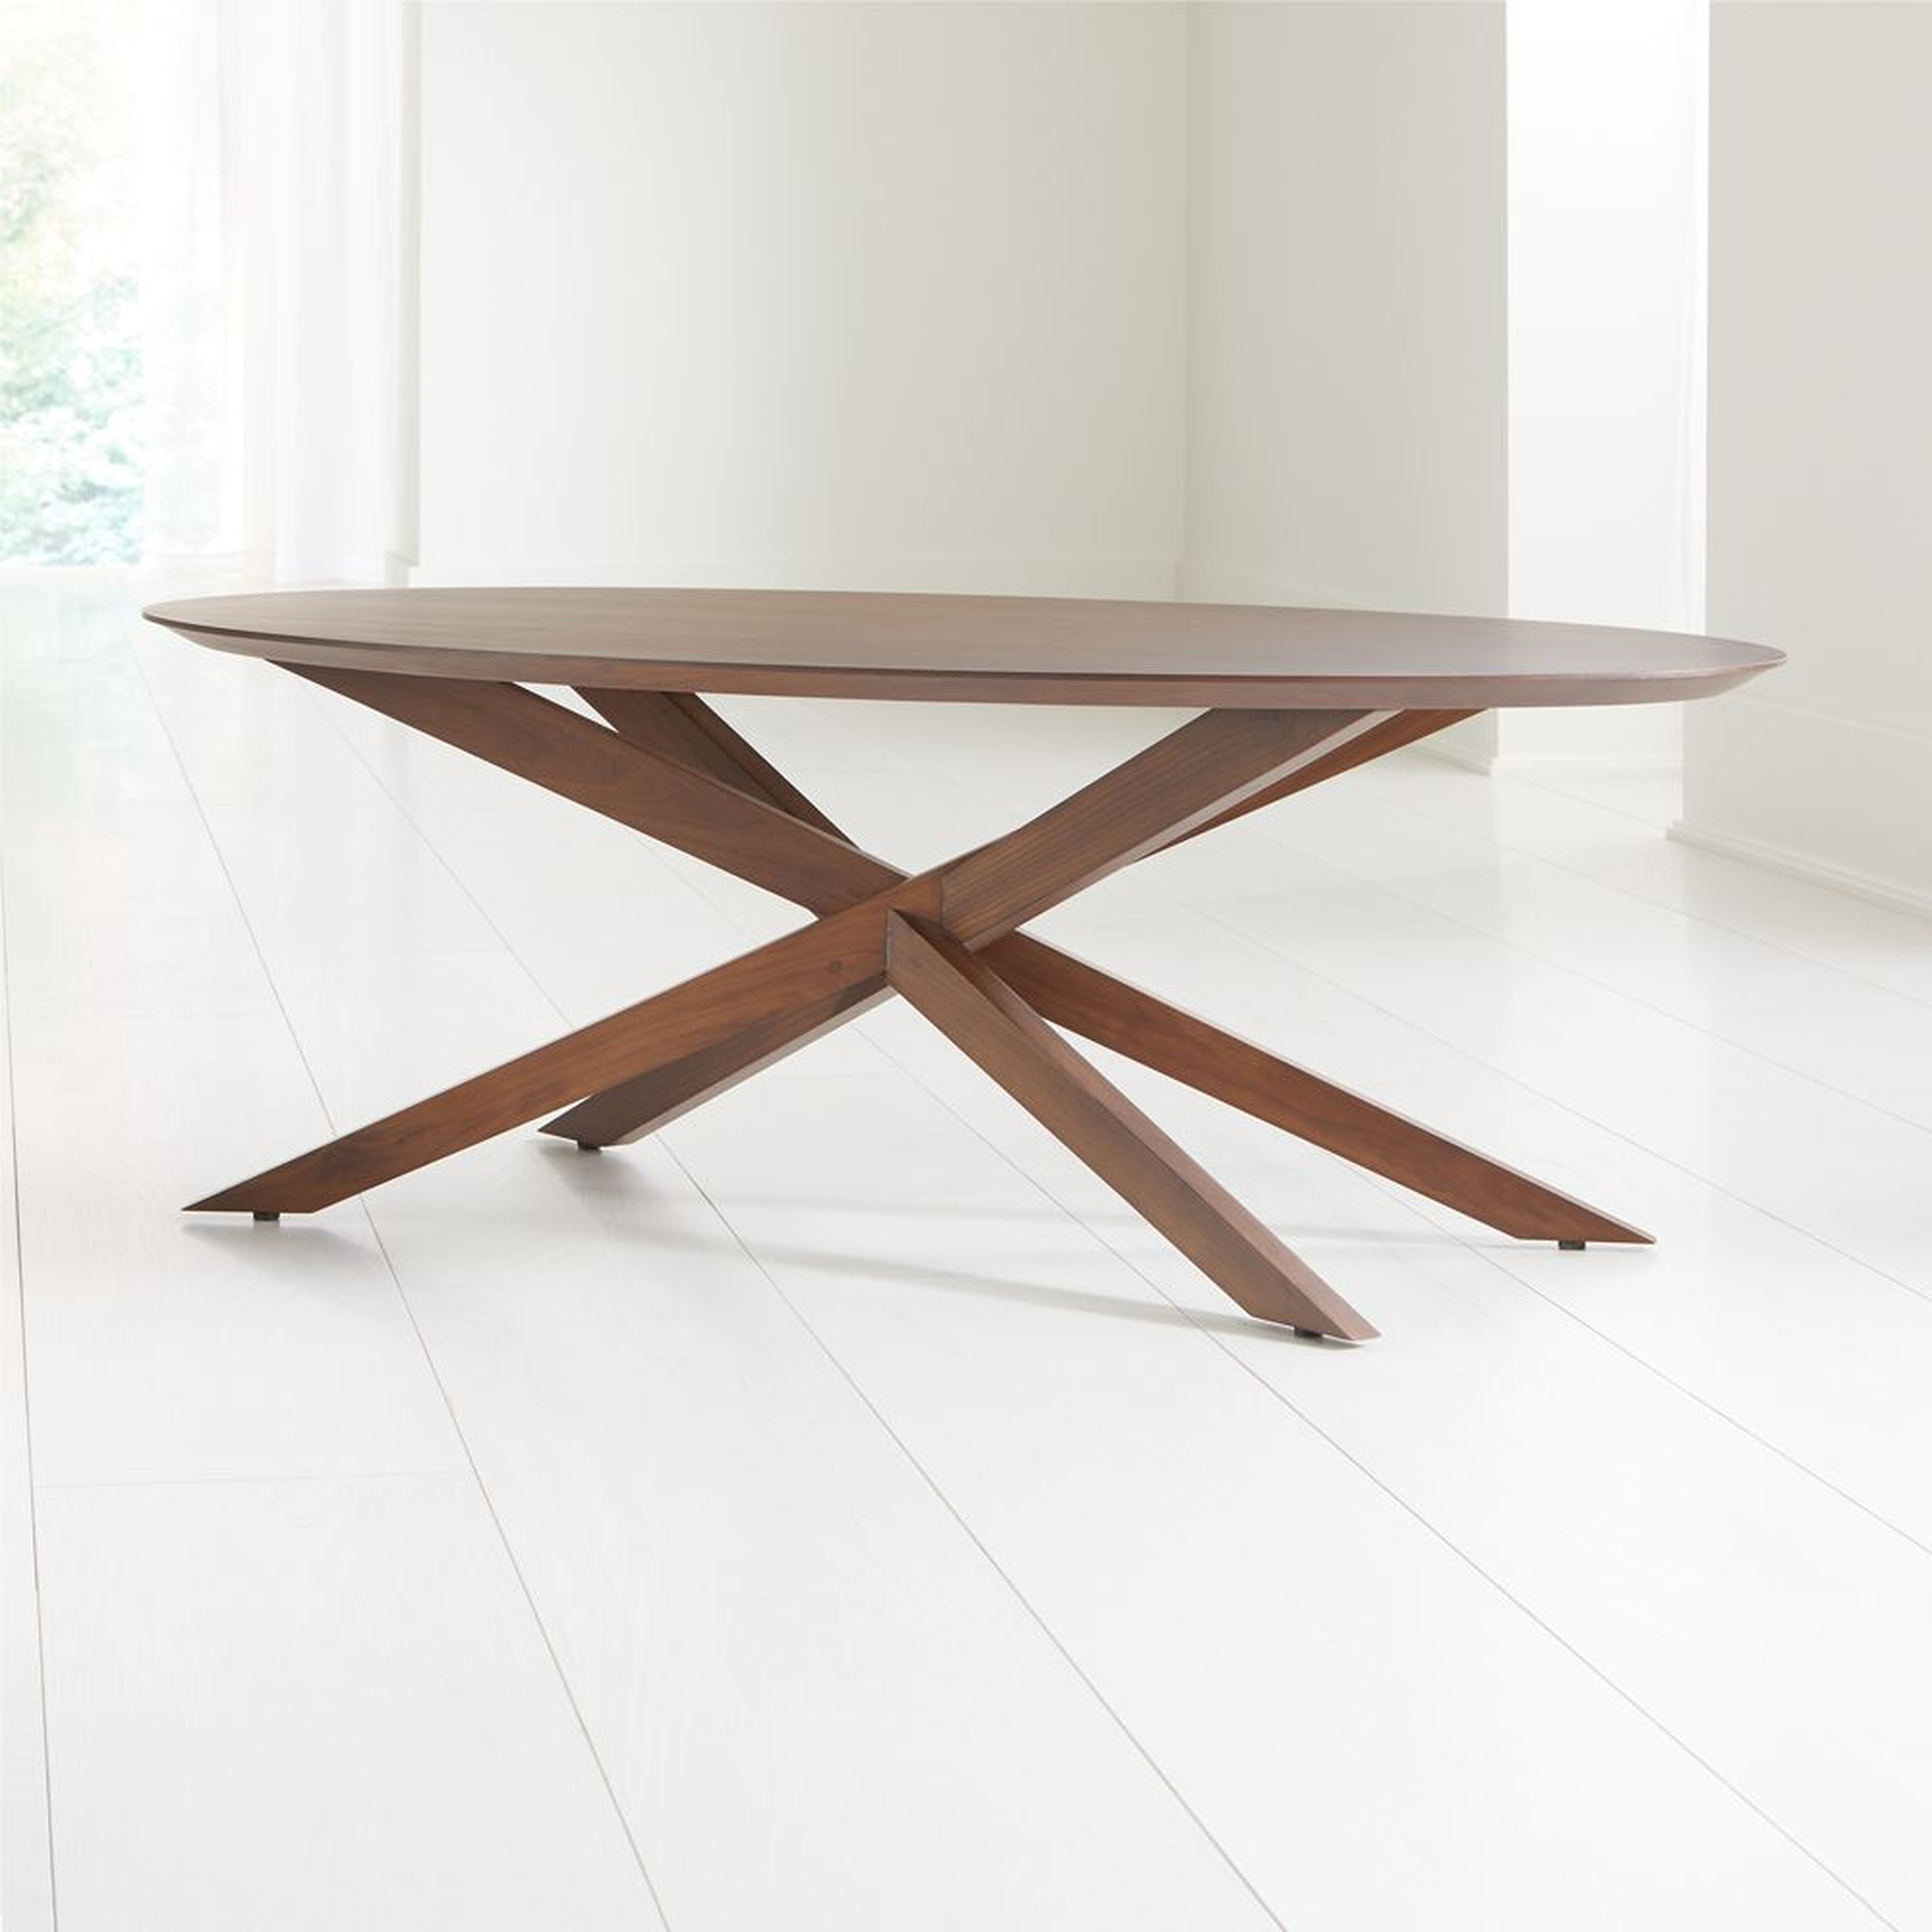 Apex Oval Coffee Table - Crate and Barrel